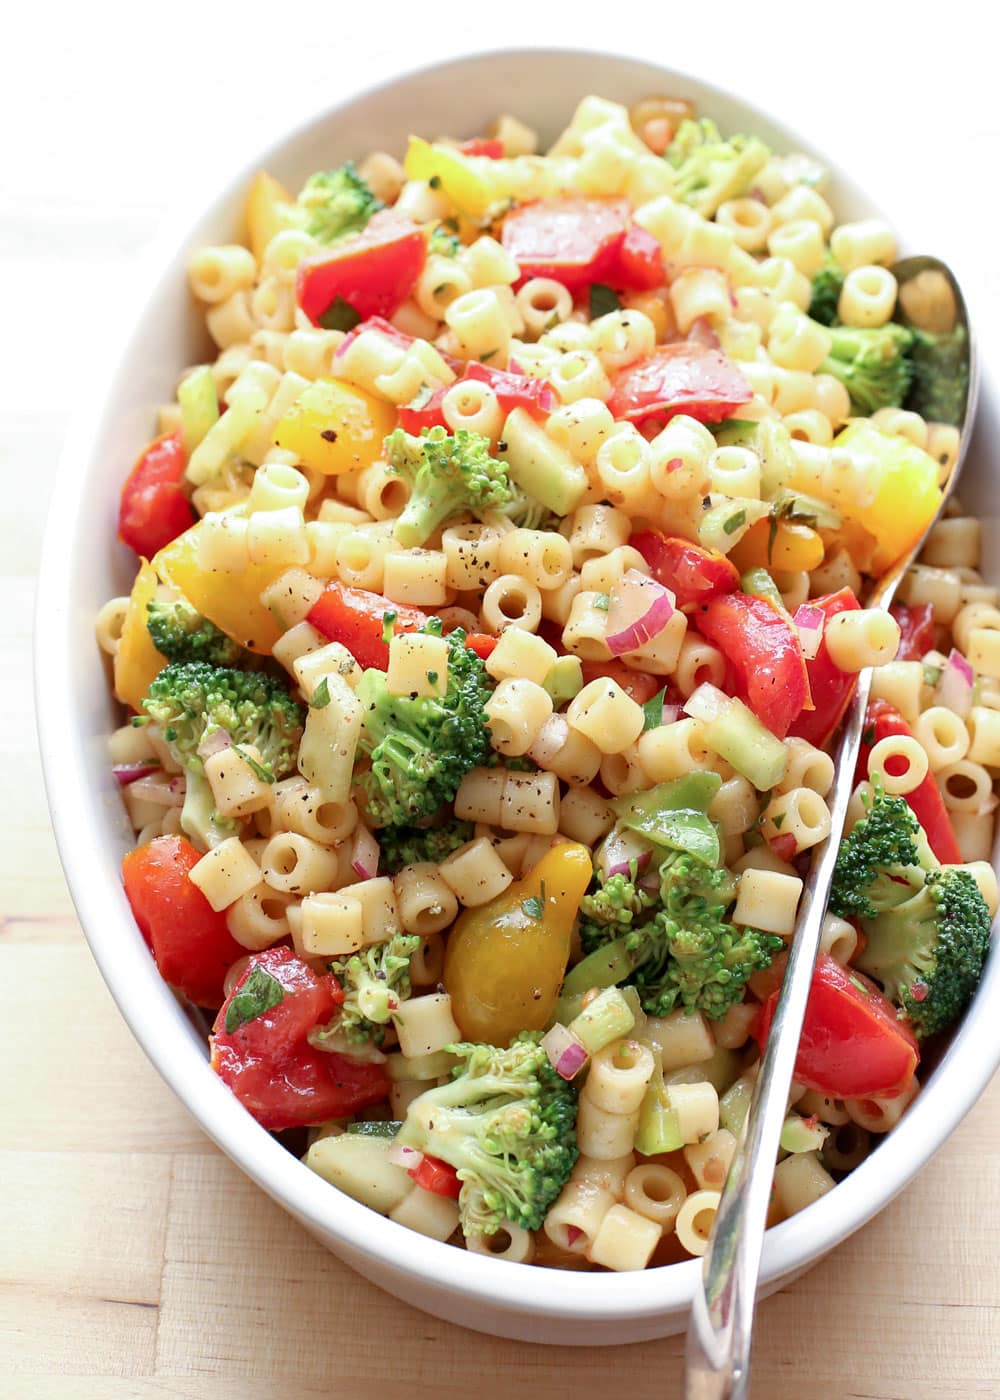 Pasta Salad Recipes For Every Season - Barefeet in the Kitchen